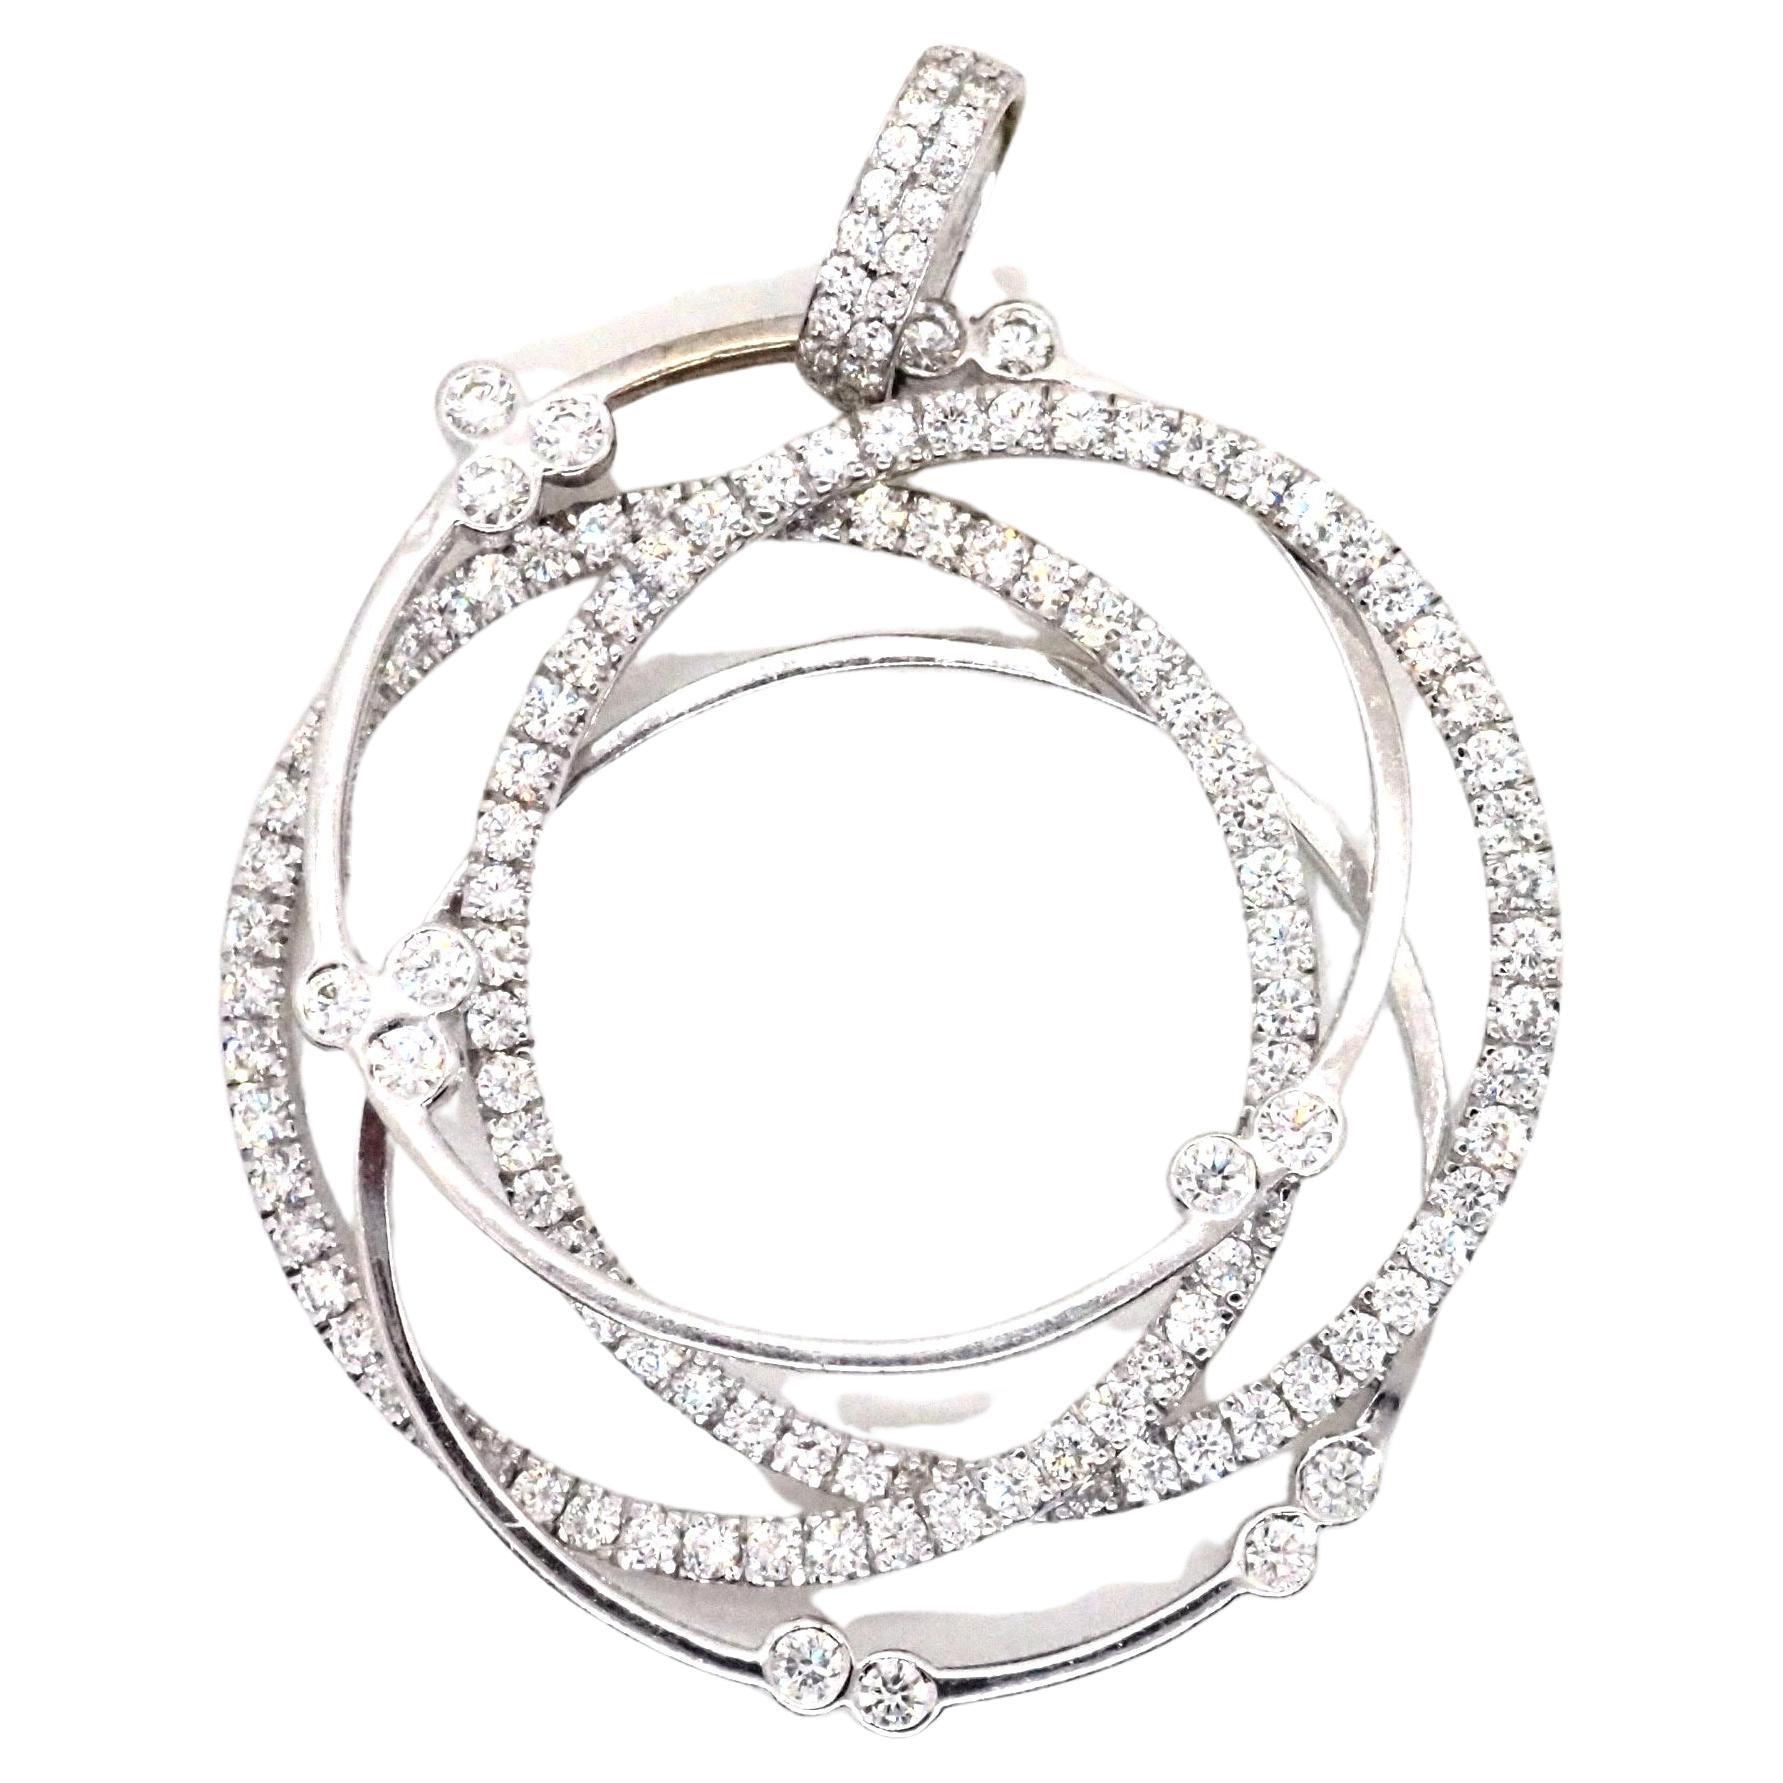 Sublime quadruple halo pendant made of 18 karats white gold, two of the halos are paved with 106 round shape diamonds, the other two rings have a total of 14 diamonds, and the pendant there are ten more diamonds, an approximate weight of the